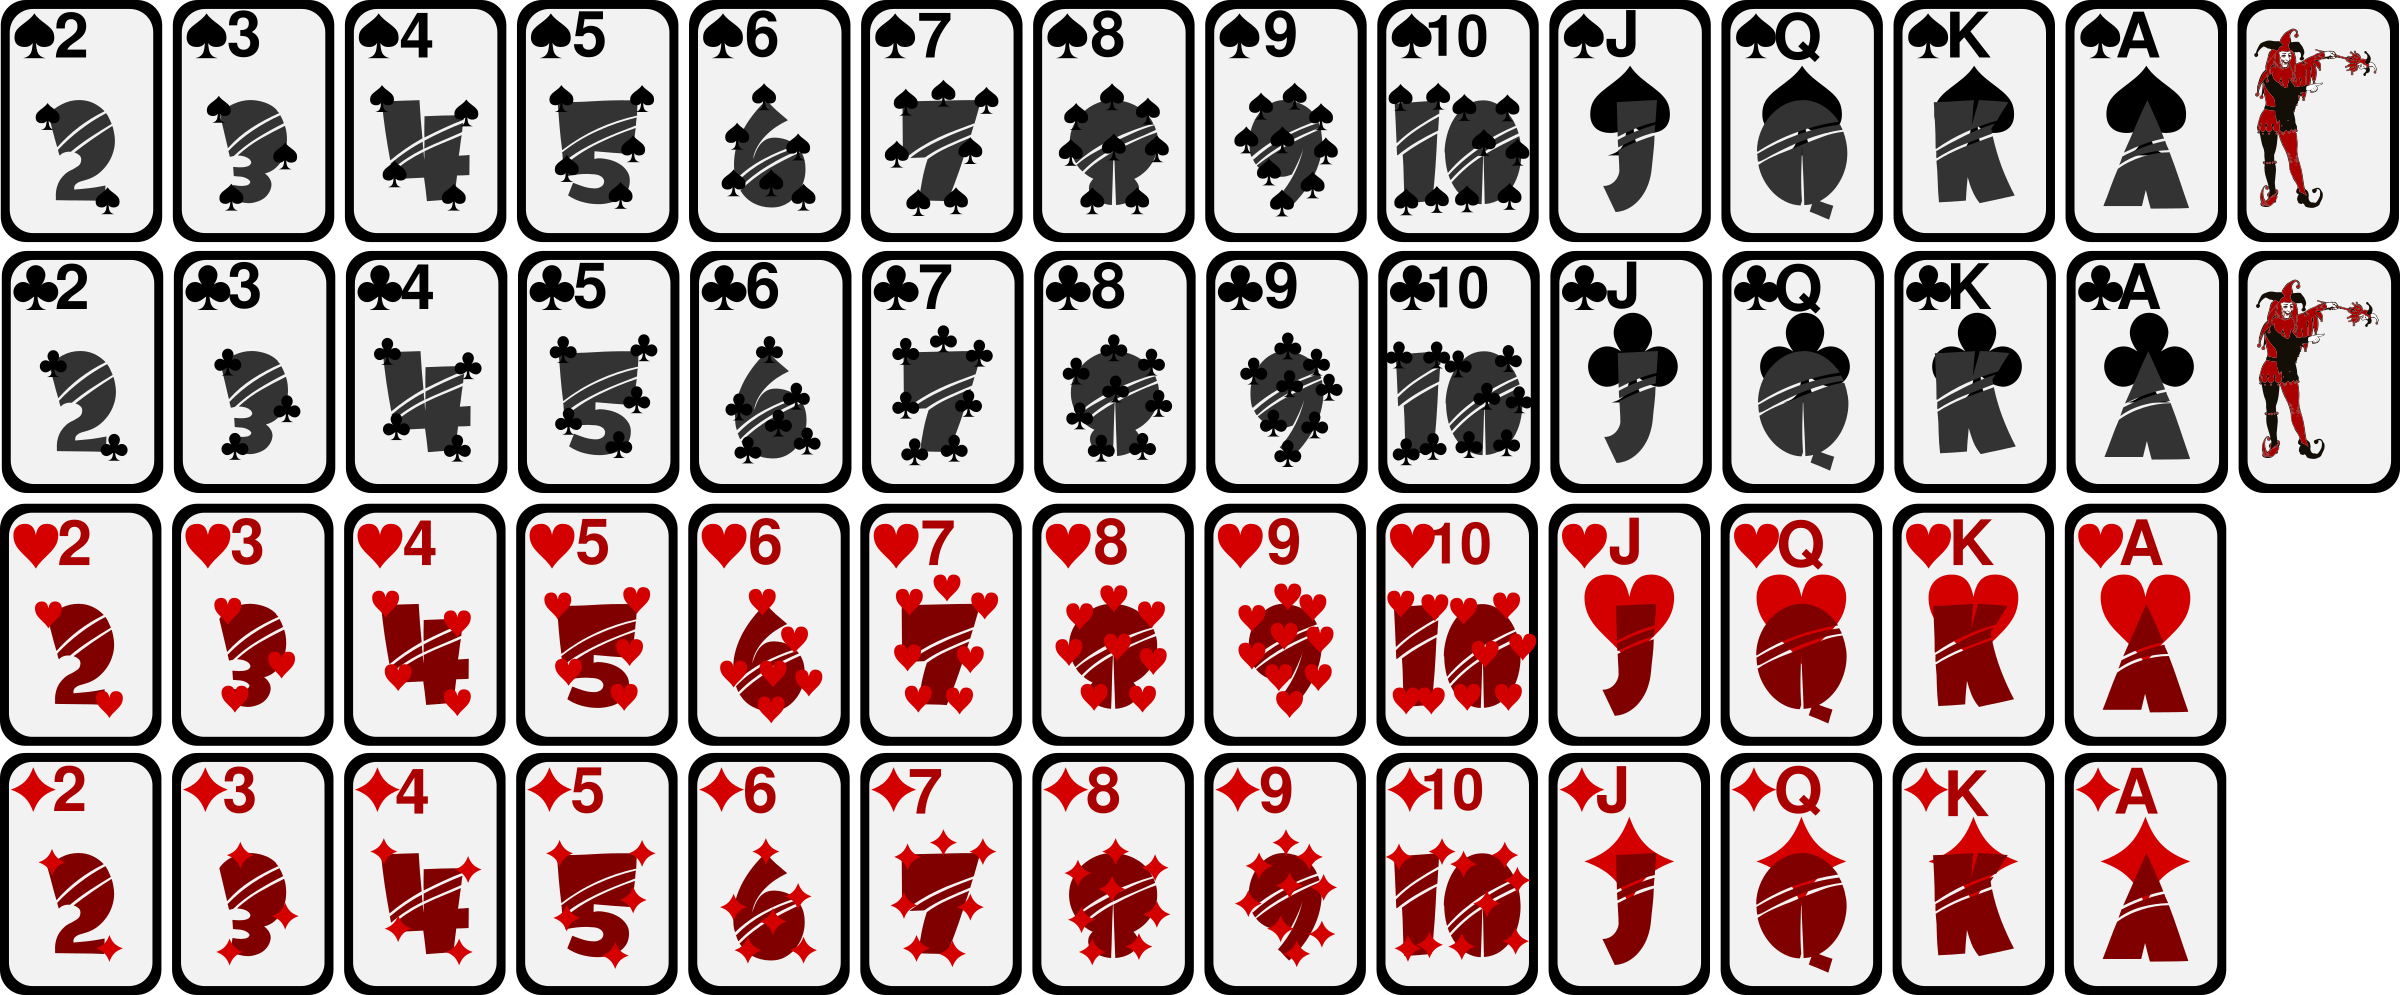 Clipart - Deck of Playing Cards